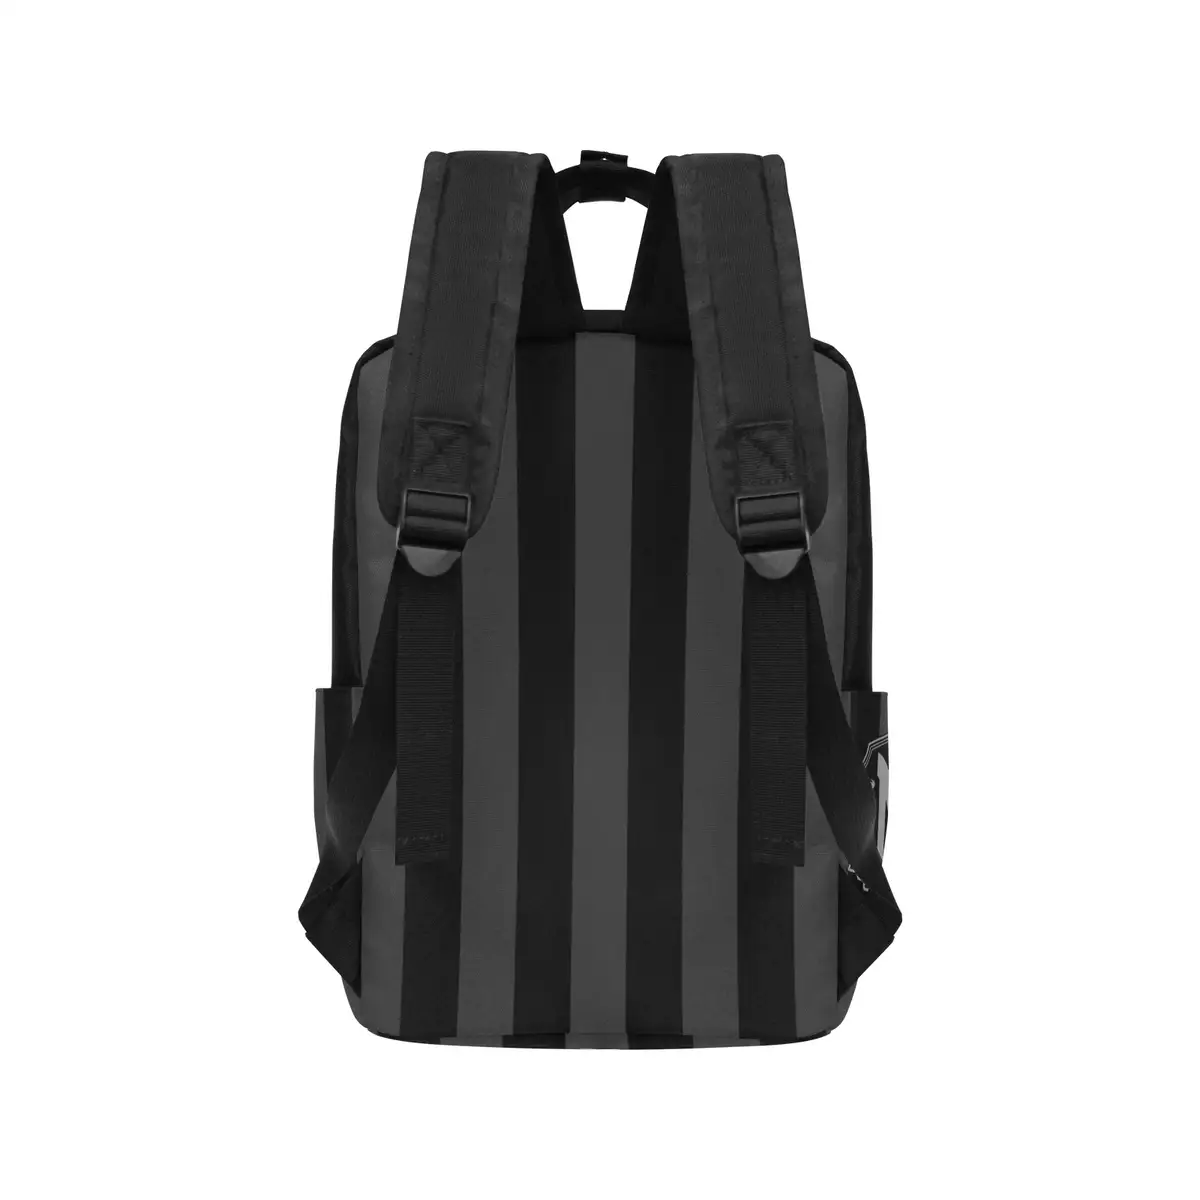 Wednesday Addams Uniform Inspired Backpack, Youth Book Bag for School, Nevermore Academy Rucksack Cool Kiddo 22